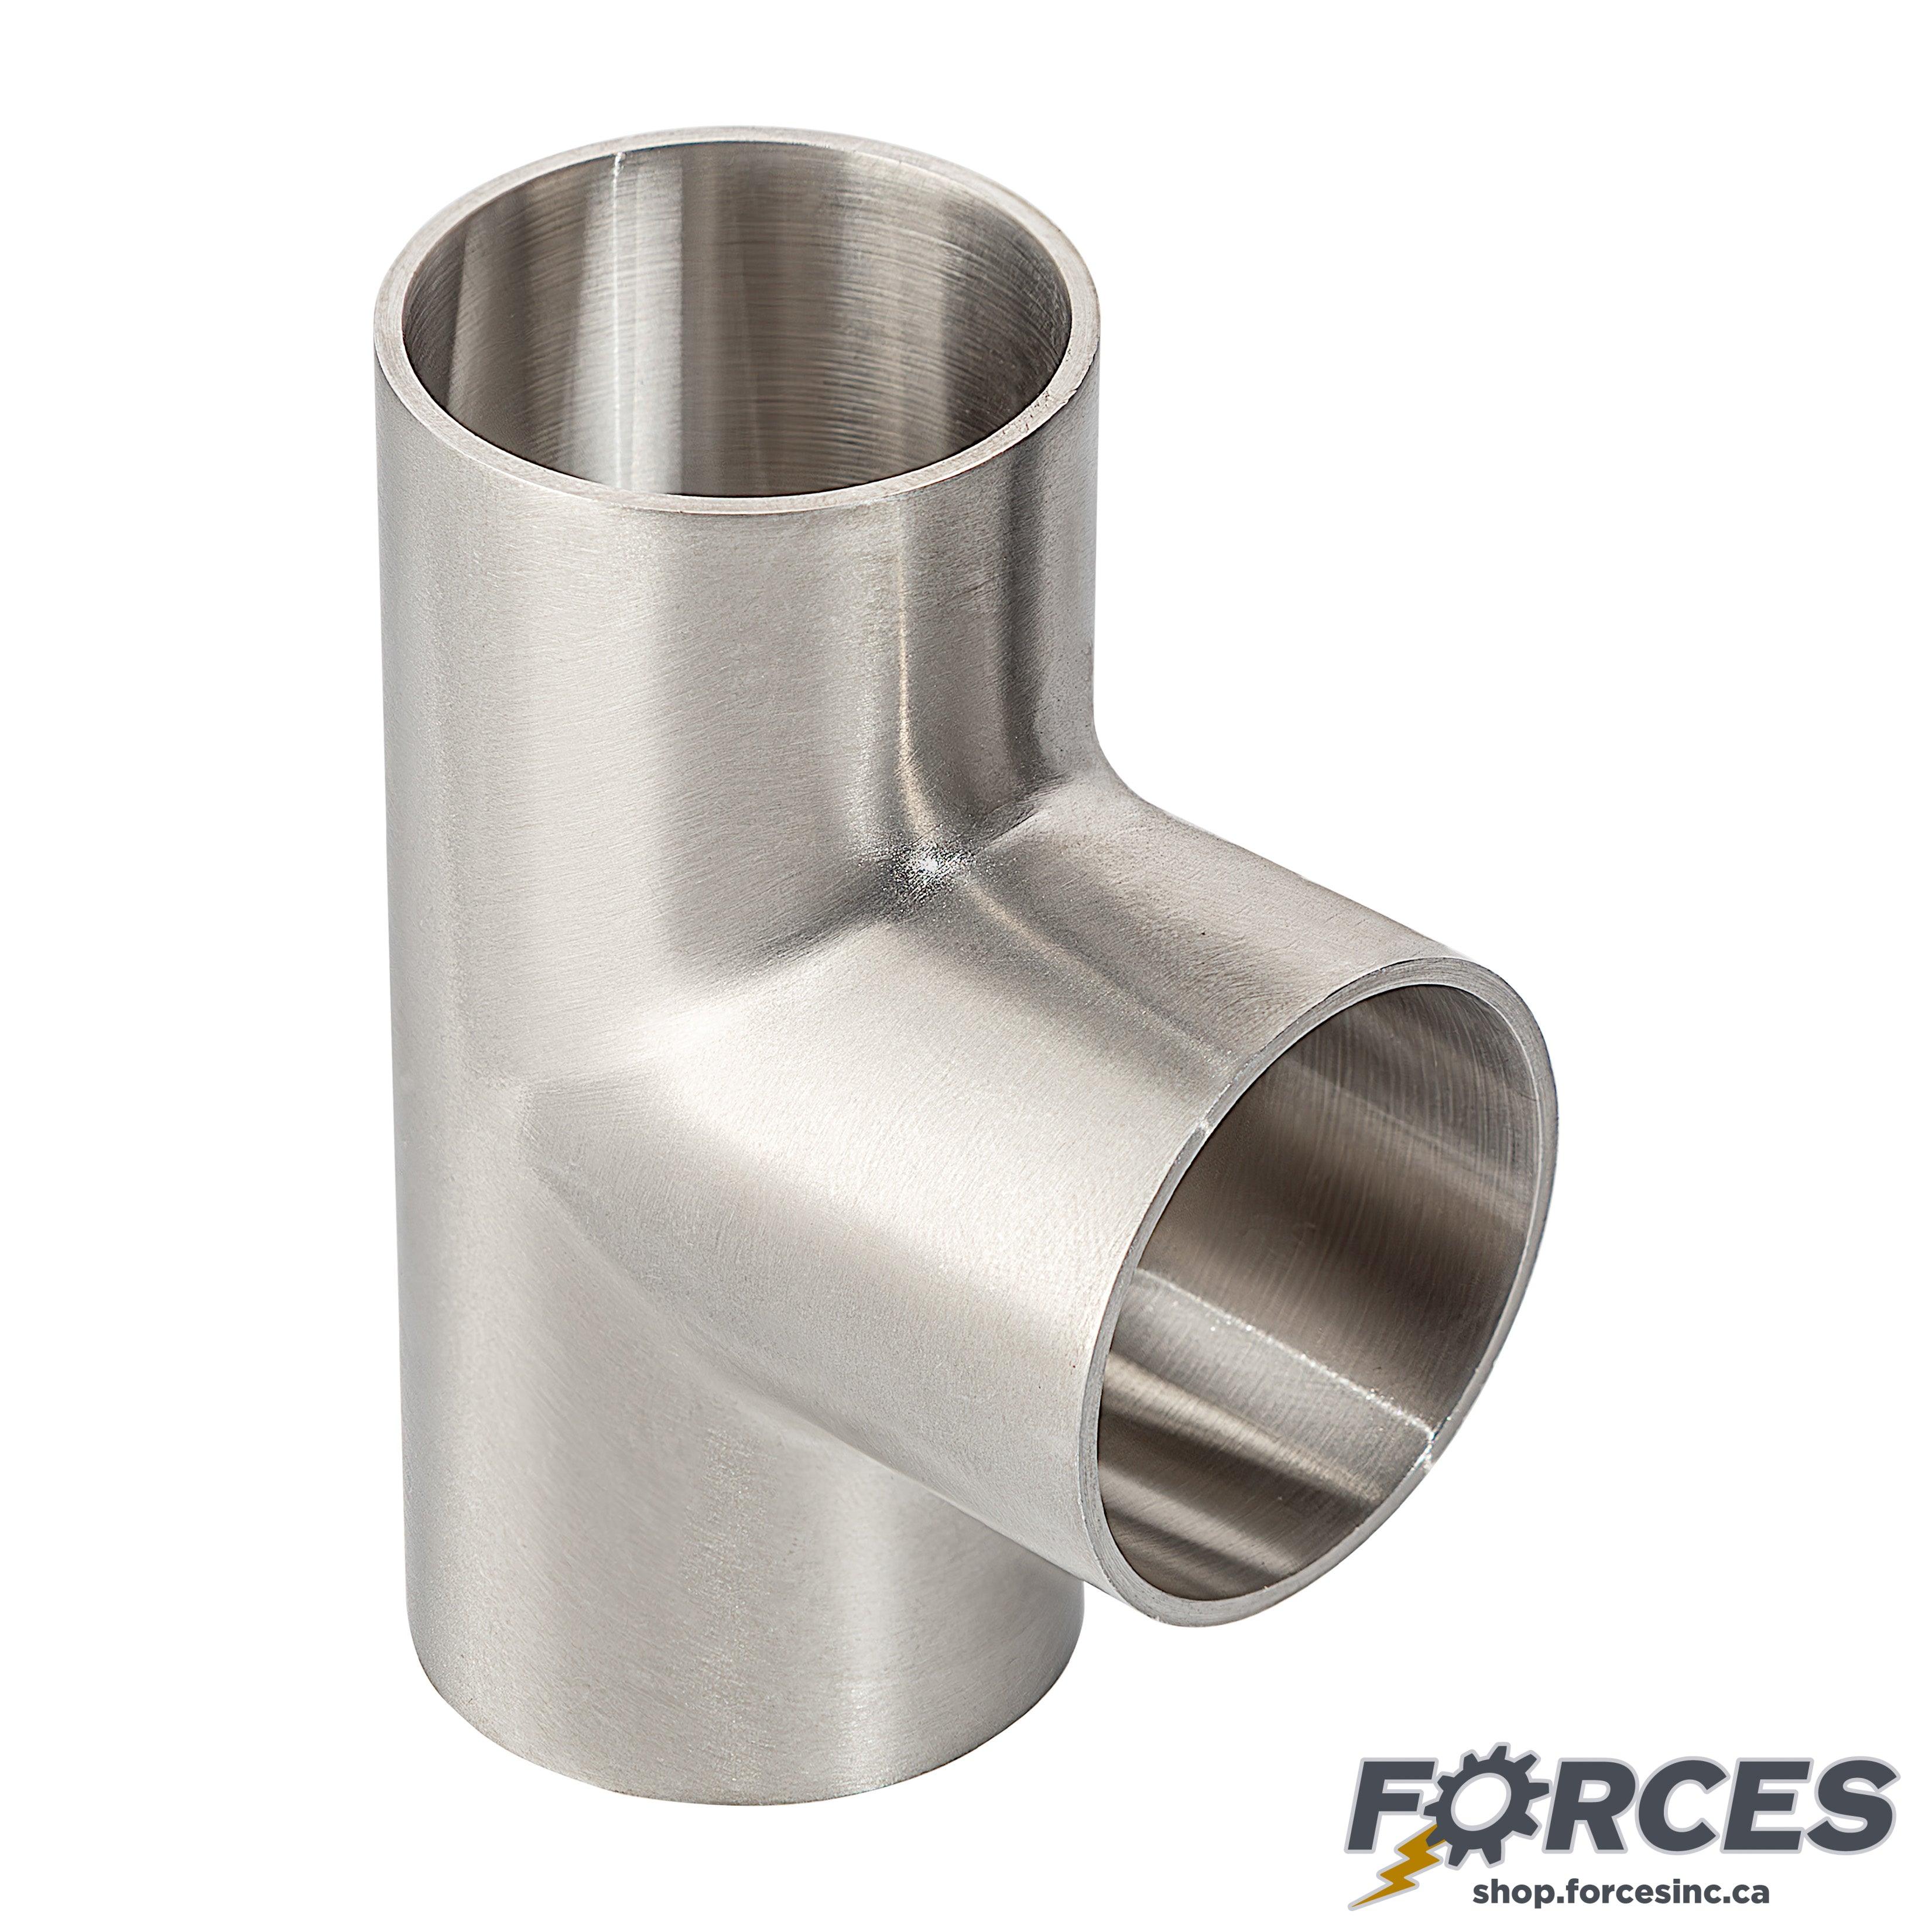 1/2" Butt Weld Short Tee - Stainless Steel 316 - Forces Inc